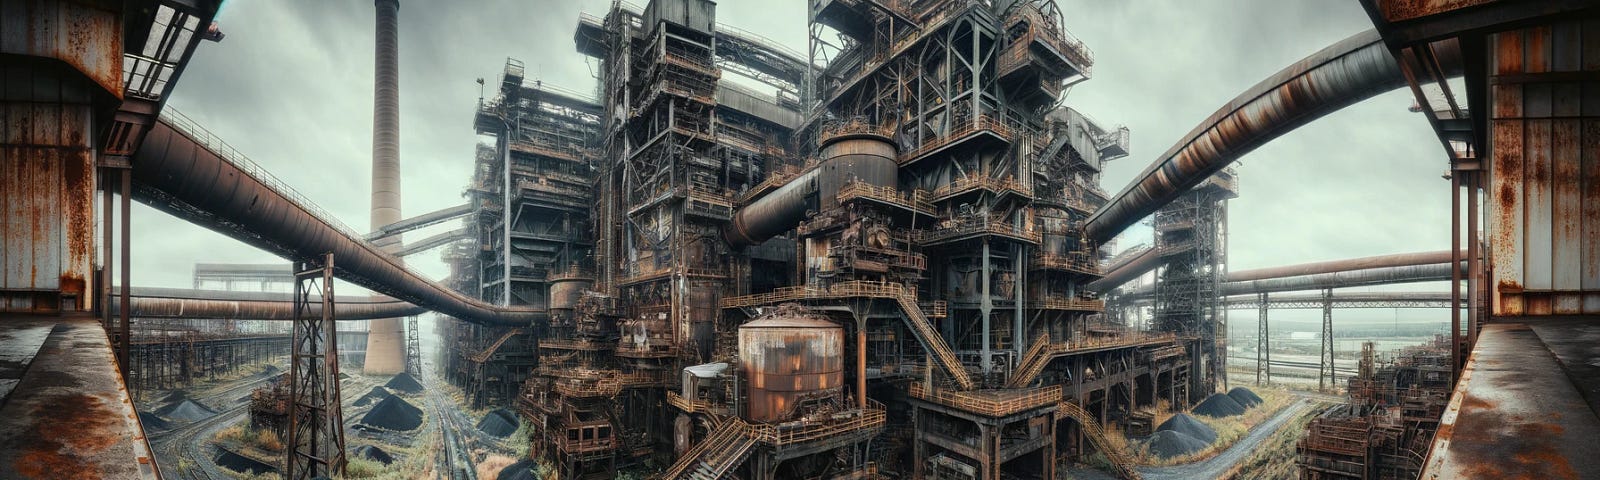 ChatGPT & DALL-E generated panoramic image of an abandoned and rusting coal generation plant, capturing the essence of decay and the encroachment of nature on the once-operational facility.